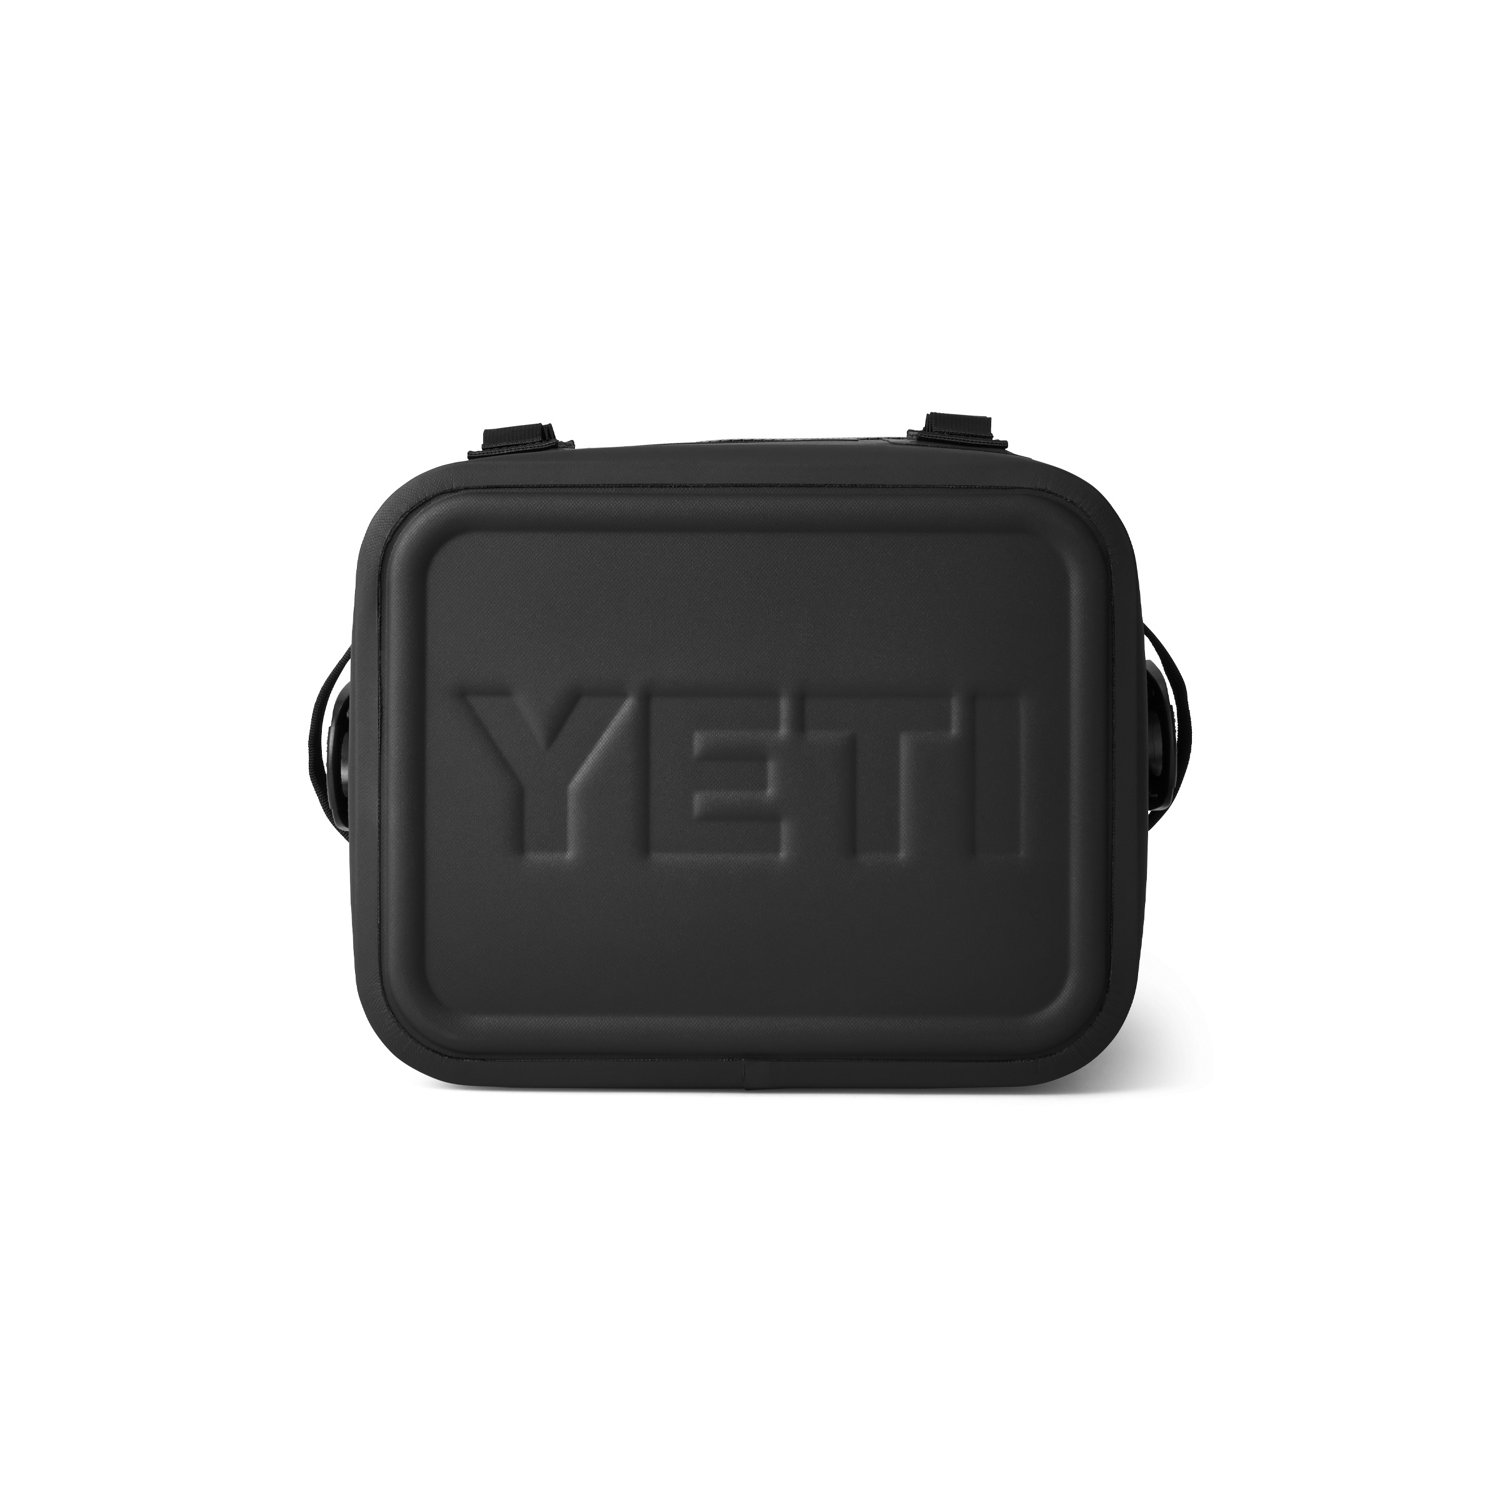 https://academy.scene7.com/is/image/academy//coolers/yeti-hopper-flip-12-cooler-18060131270-black/d119944e4ef54f21ae686246961910df?$pdp-mobile-gallery-ng$